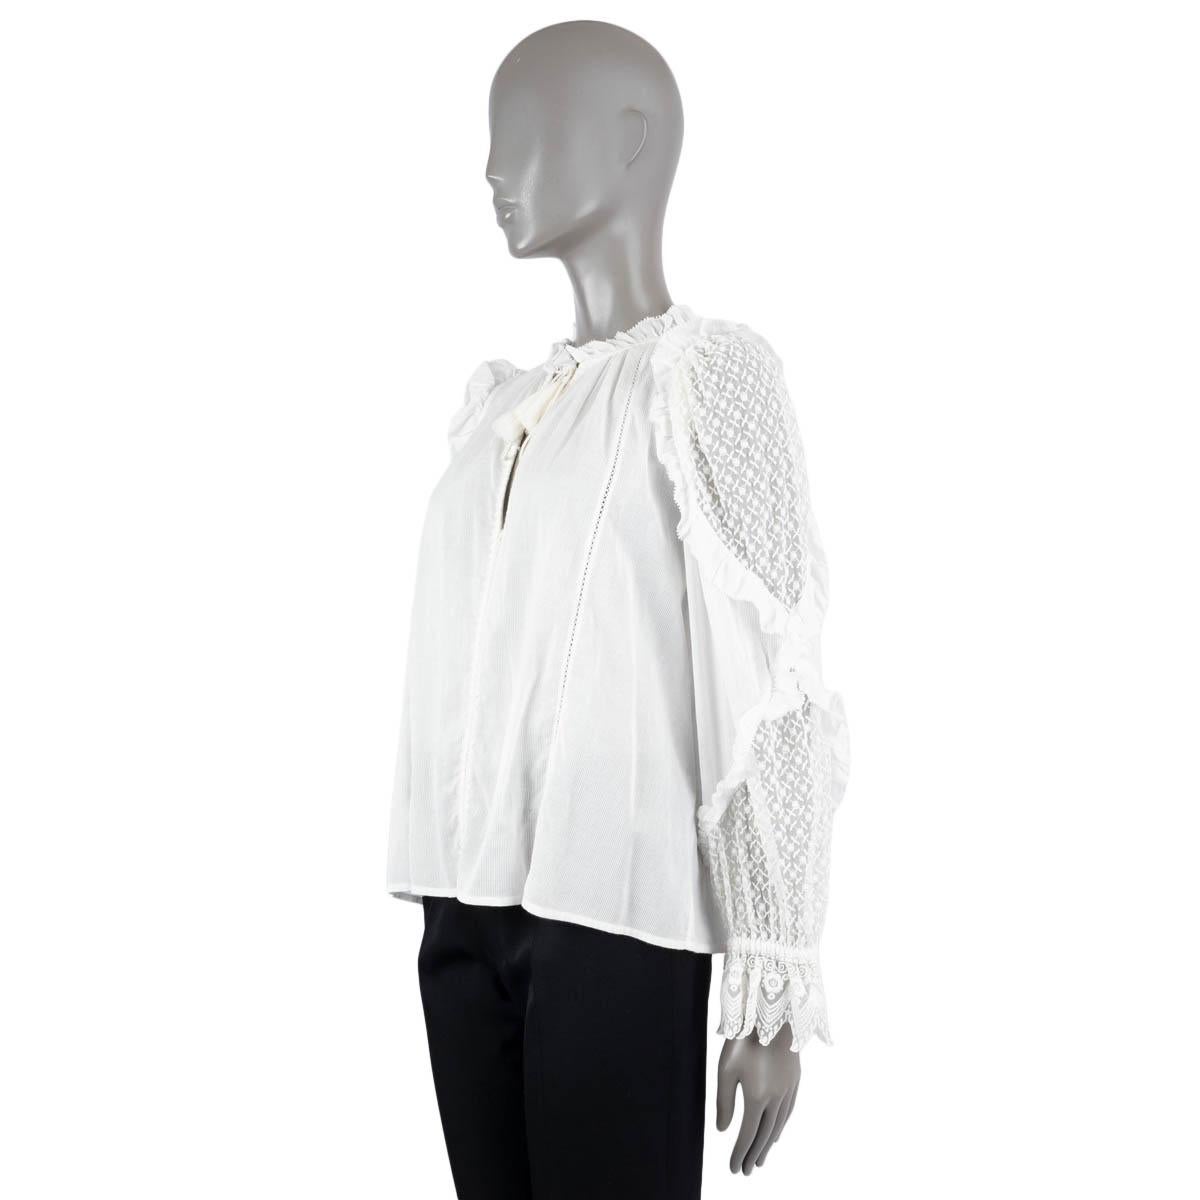 ULLA JOHNSON white cotton SHIRLEY SEMI SHEER RUFFLED Blouse Shirt M In Excellent Condition For Sale In Zürich, CH